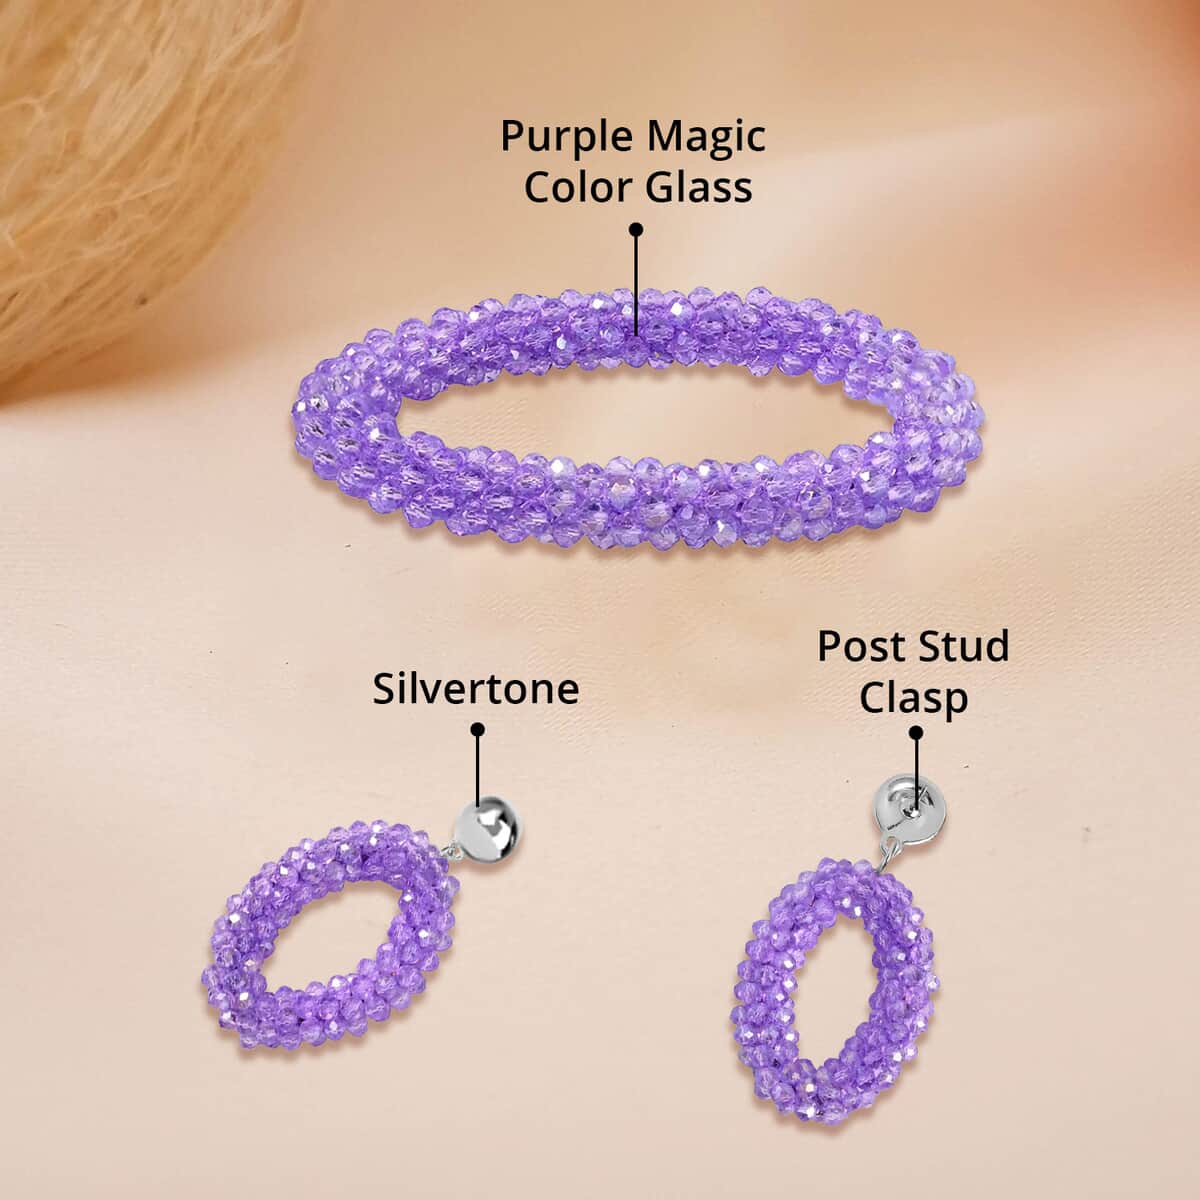 Purple Magic Color Glass Beaded Bracelet (7.0-7.50In) and Earrings in Silvertone image number 4